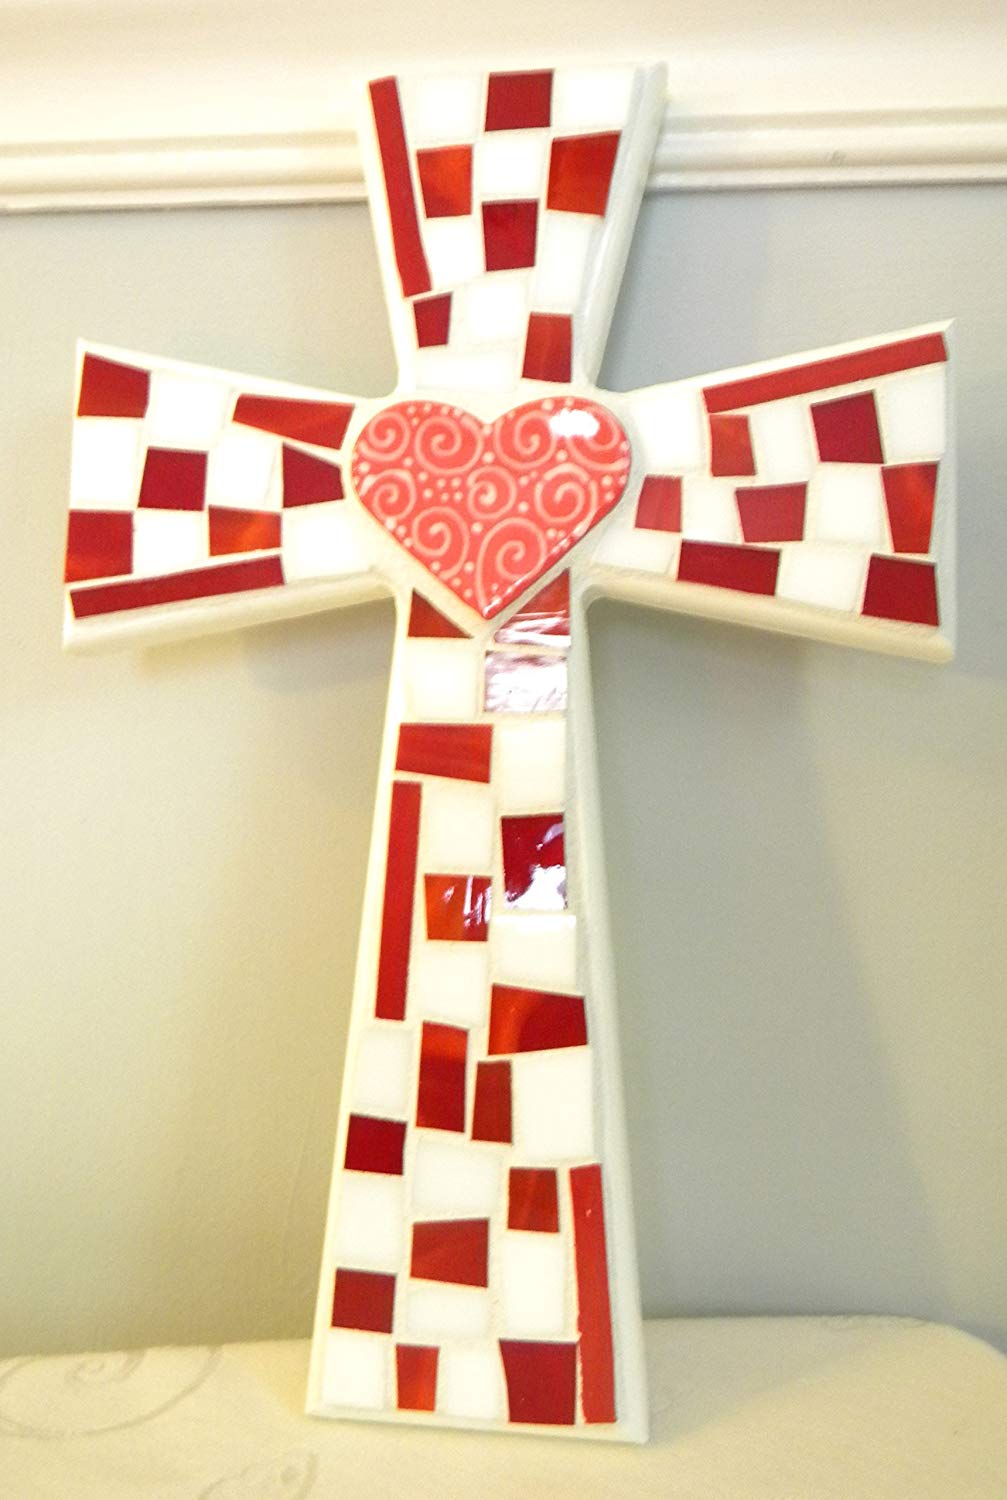 Red Heart with White Cross Logo - Cheap White Cross Red, find White Cross Red deals on line at Alibaba.com